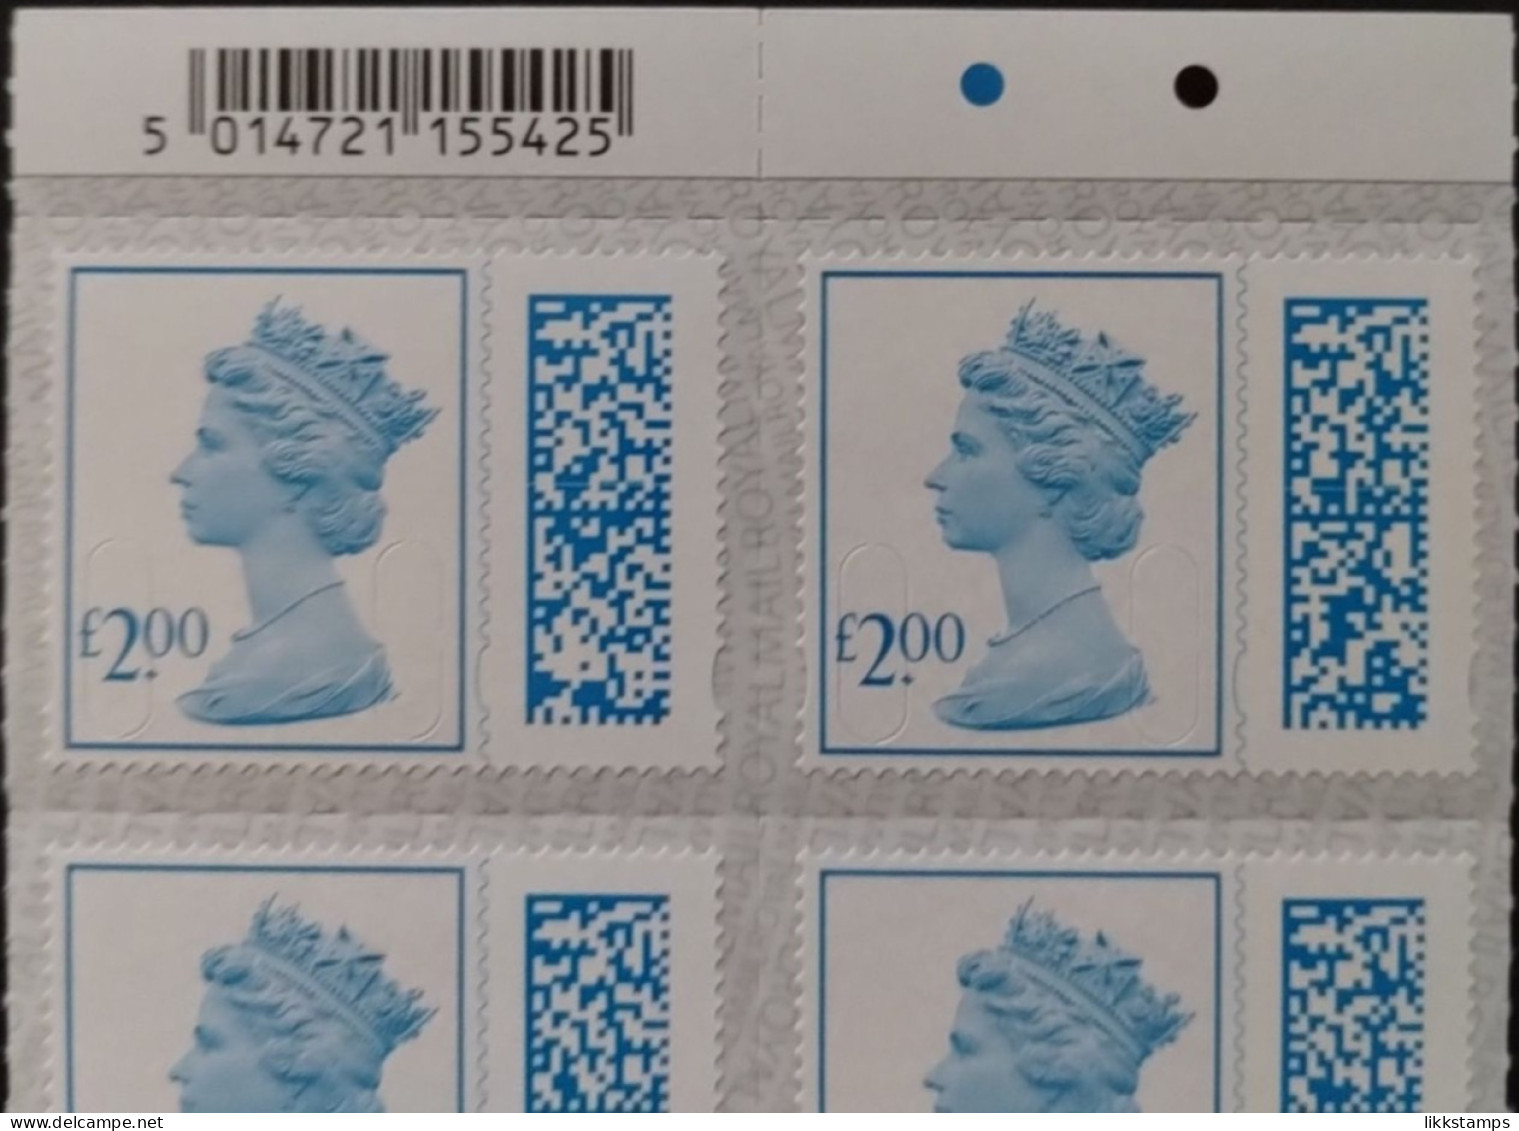 S.G.V4800 ~ BLOCK OF 10 X £2.00p NEW BARCODED DEFINITIVES UNFOLDED & NHM #02942 - Série 'Machin'